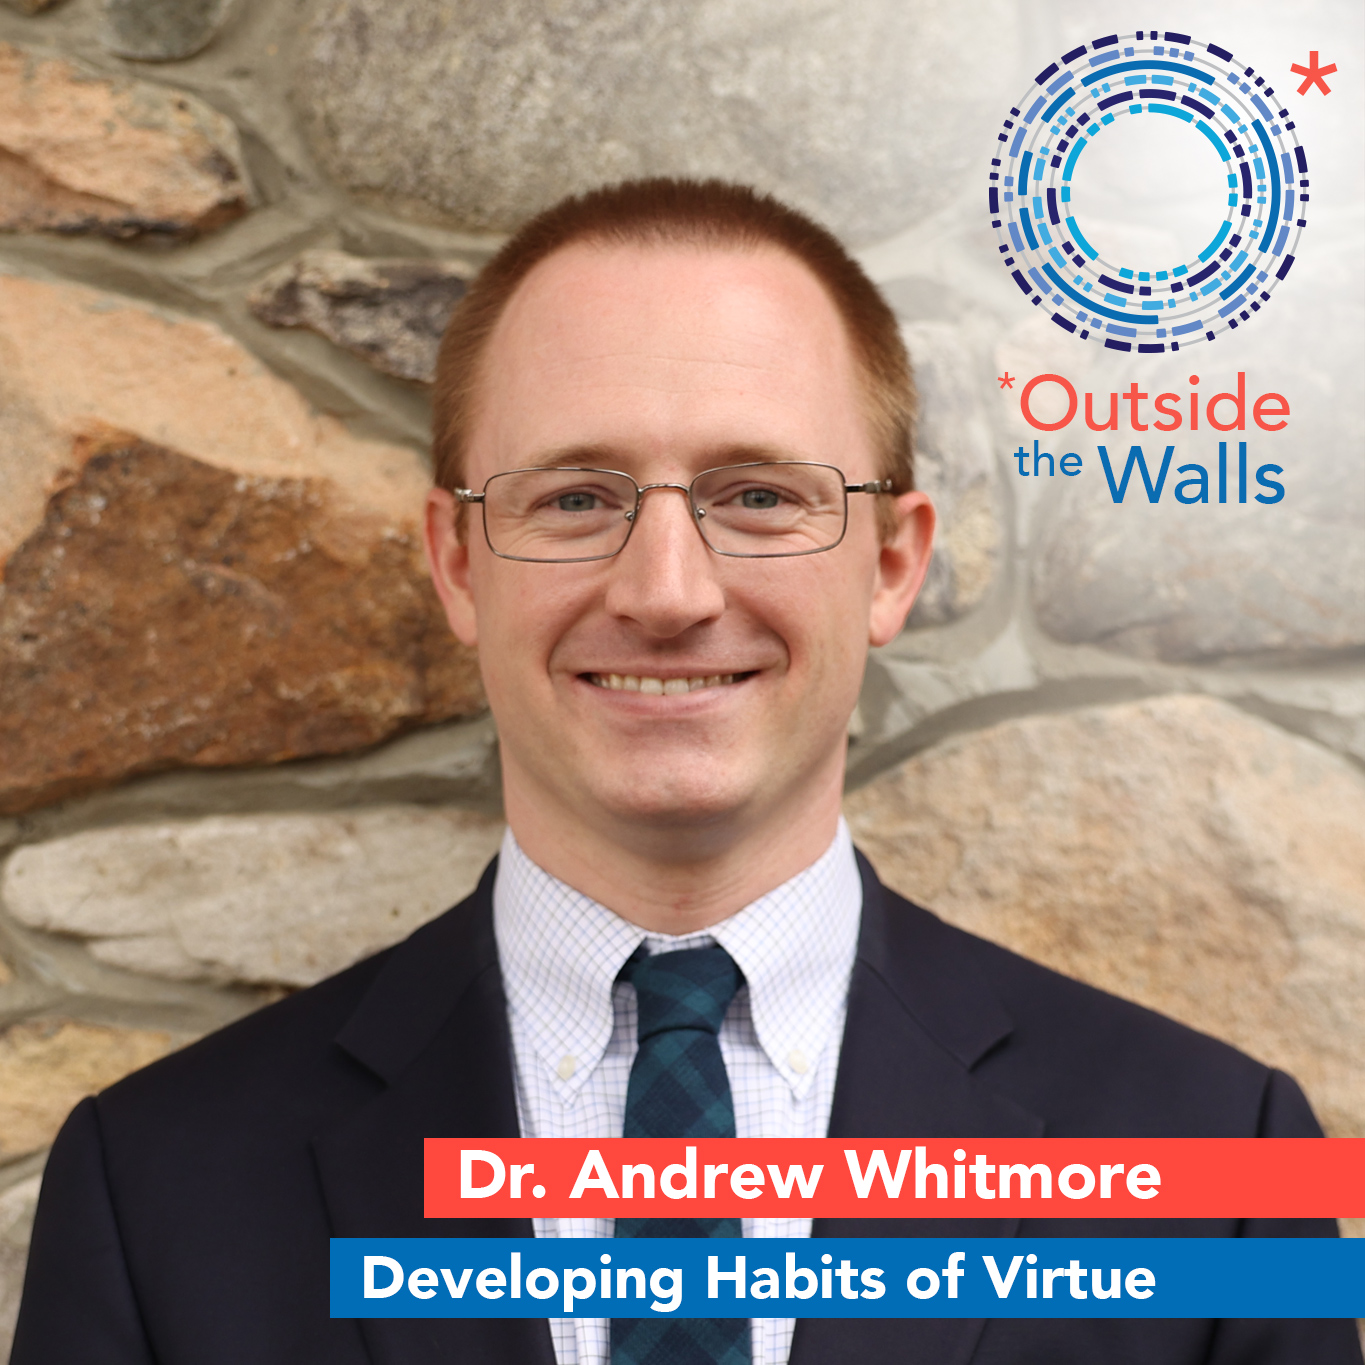 Developing Habits of Virtue: Dr. Andrew Whitmore